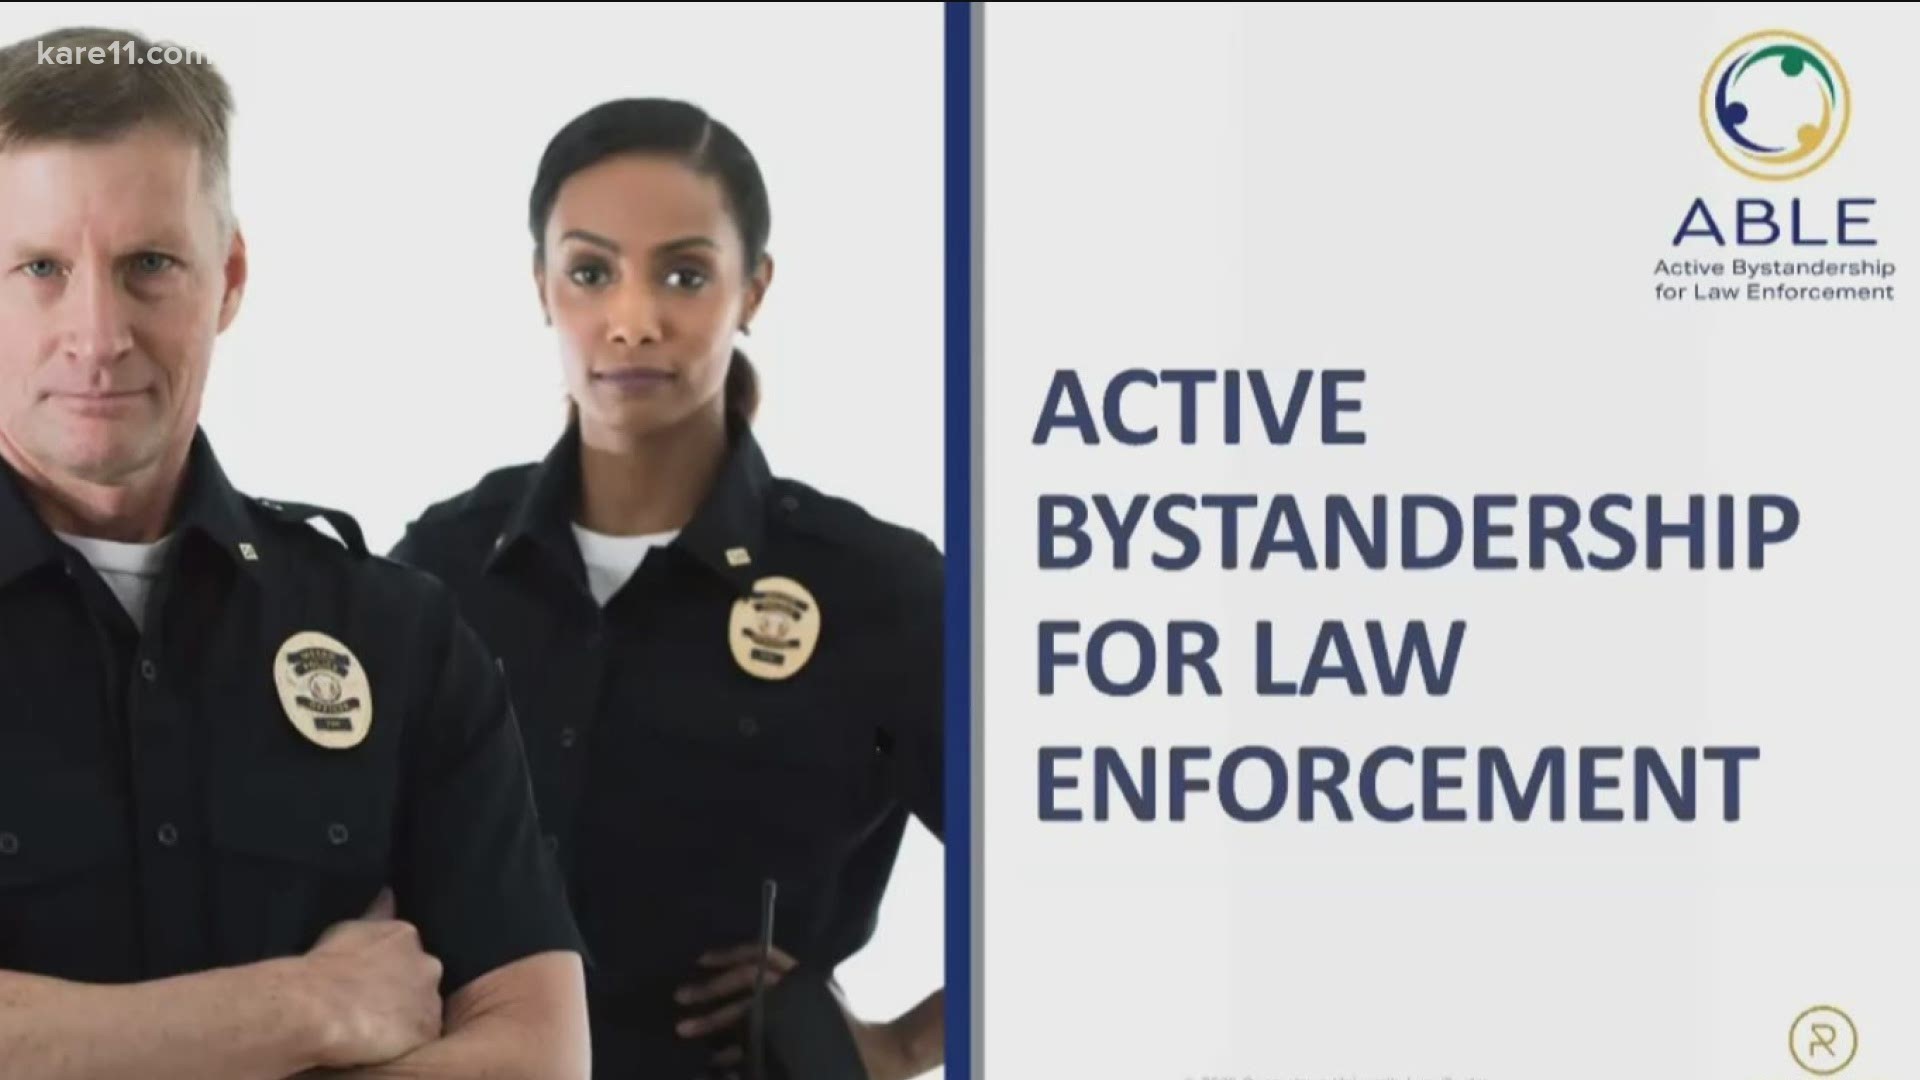 The Georgetown Innovative Policing Program created the Active Bystandership for Law Enforcement Project that is provided at no cost